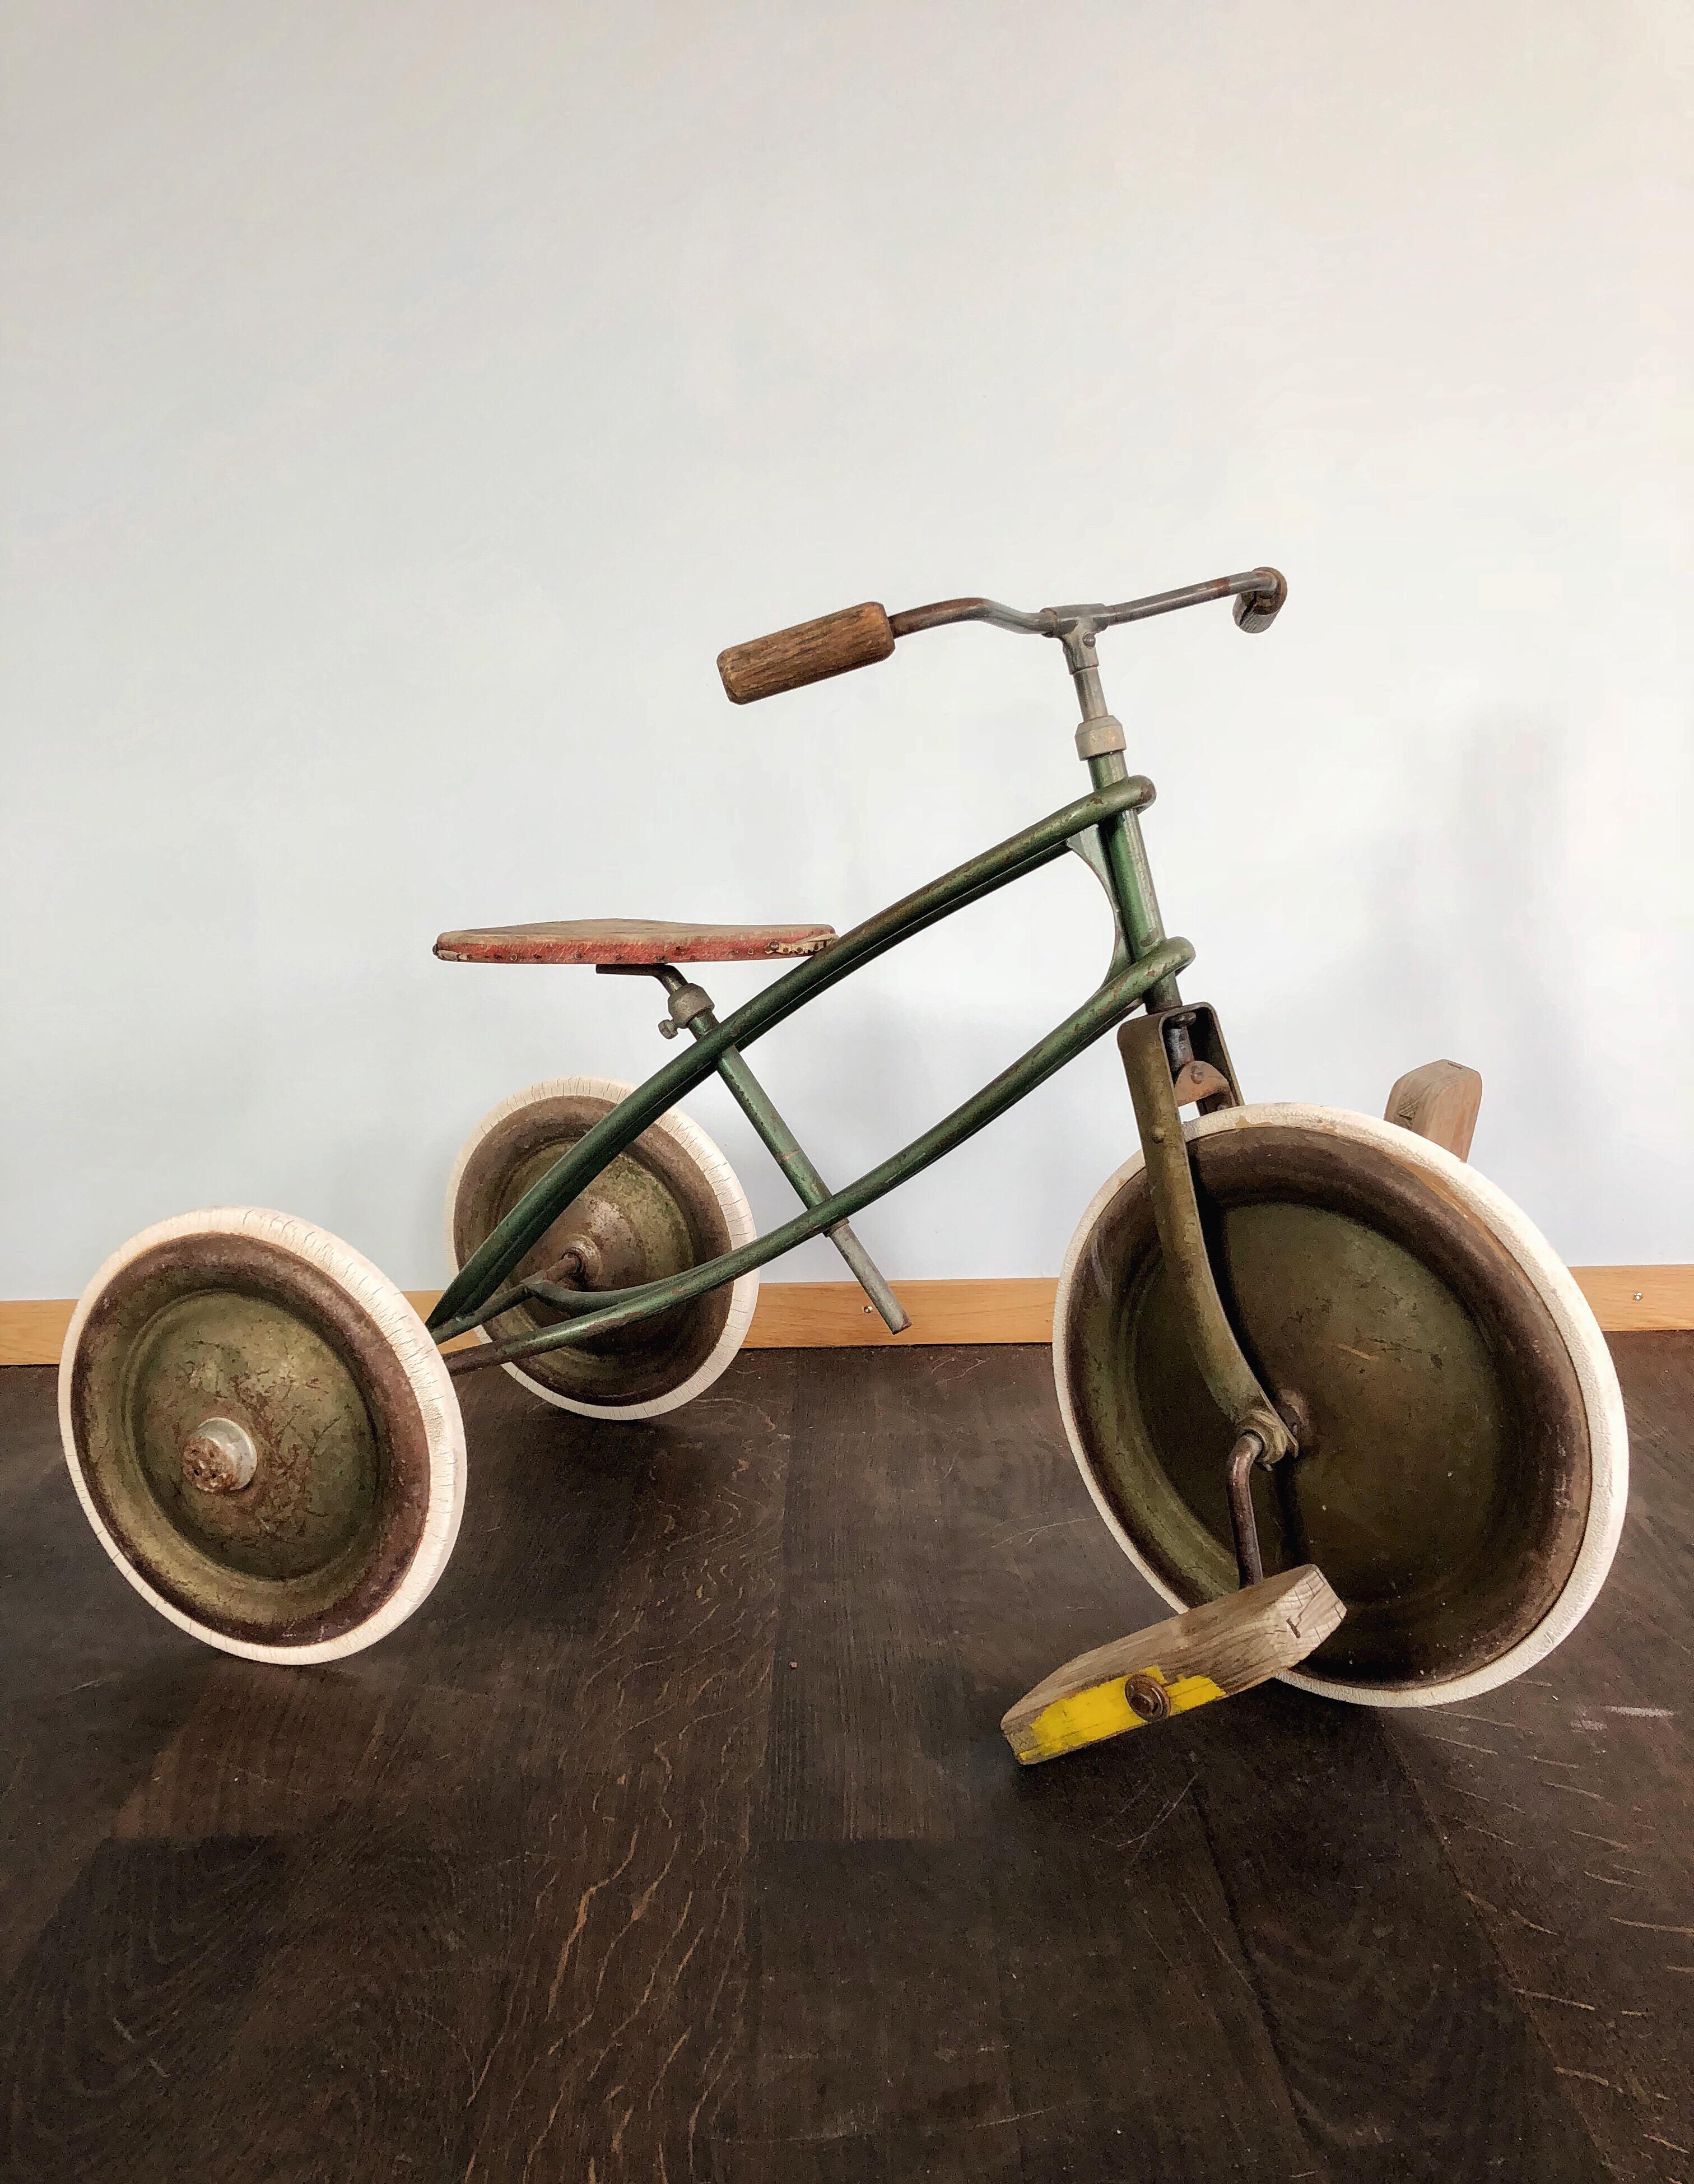 German authentic ][ / kids bike from 1940s with measurements 80 L / 43 D / 54 H cm. The seat regulates up and down. It is suitable for 4 years old kids.

Check out our other items! We always do our best to make our customers happy with the order!